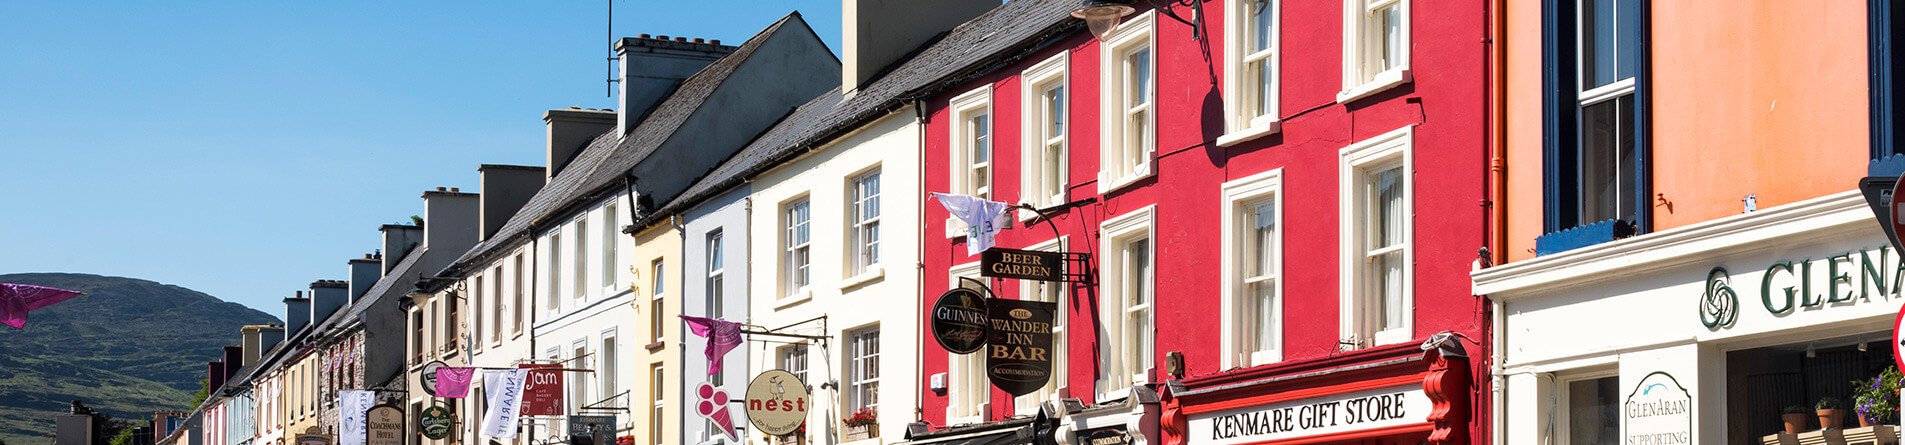 Colourful buildings in Kenmare, Kerry